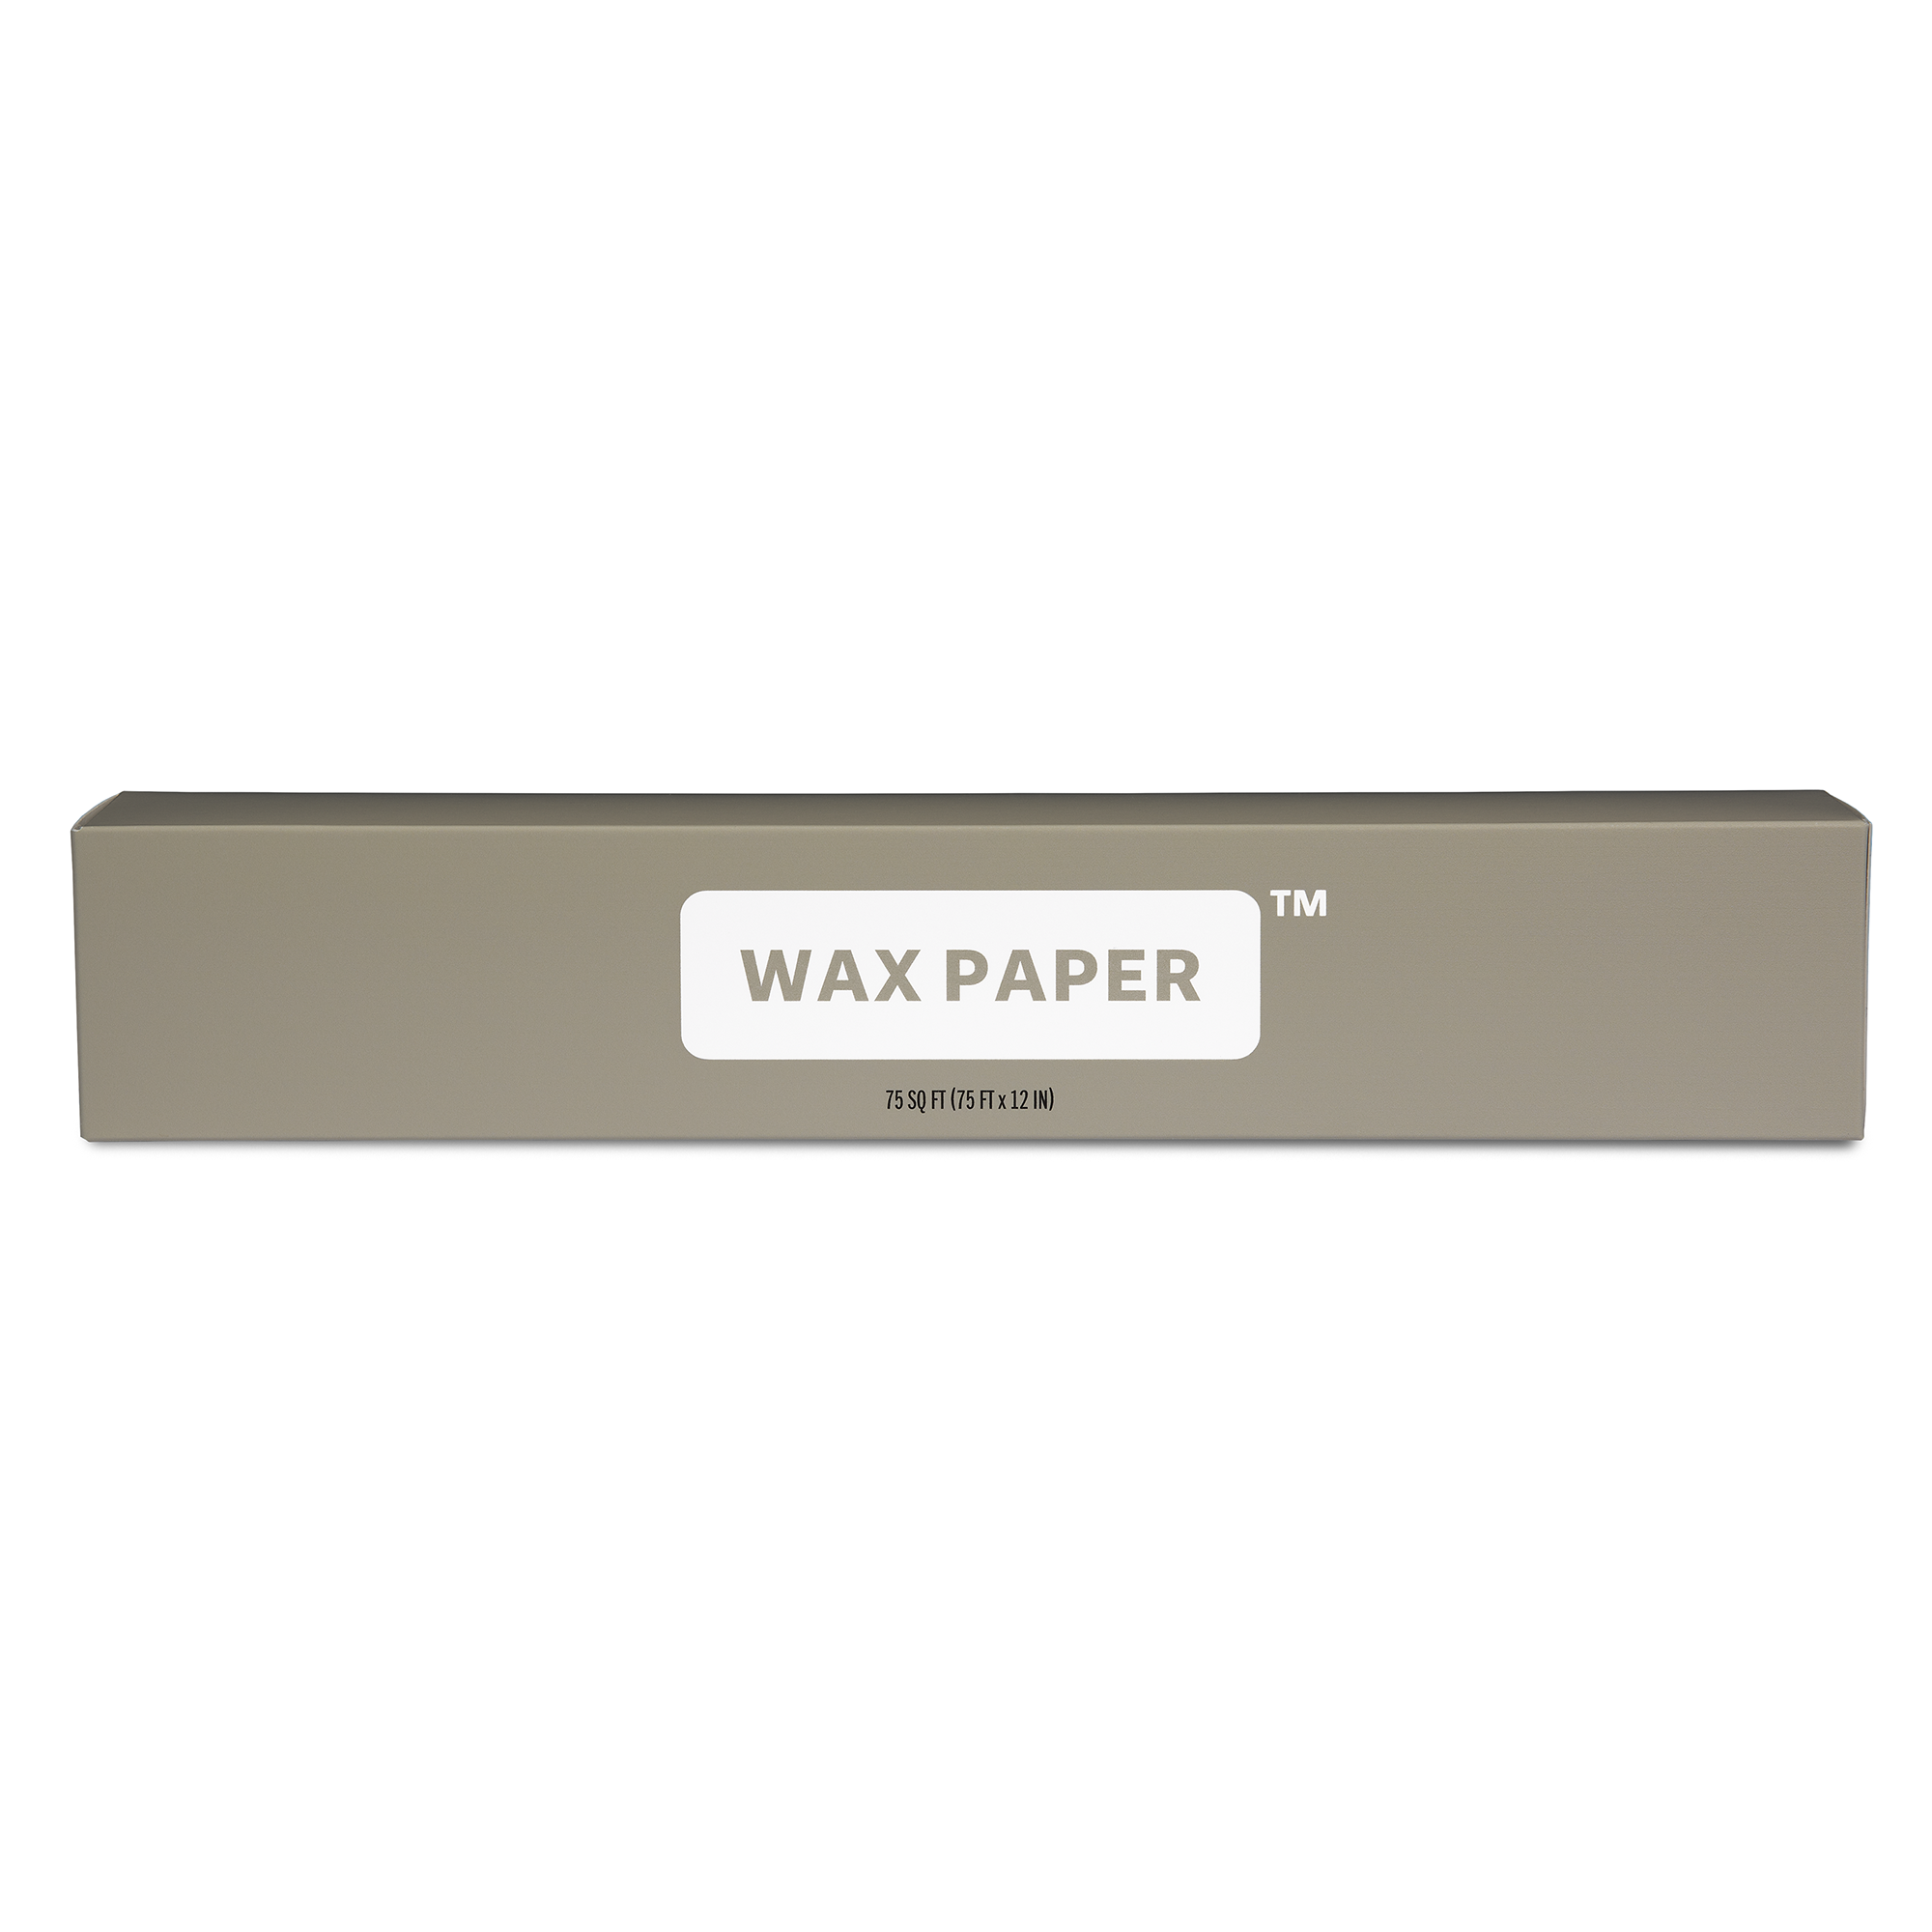 Product photo, front of box showing the product name: wax paper.